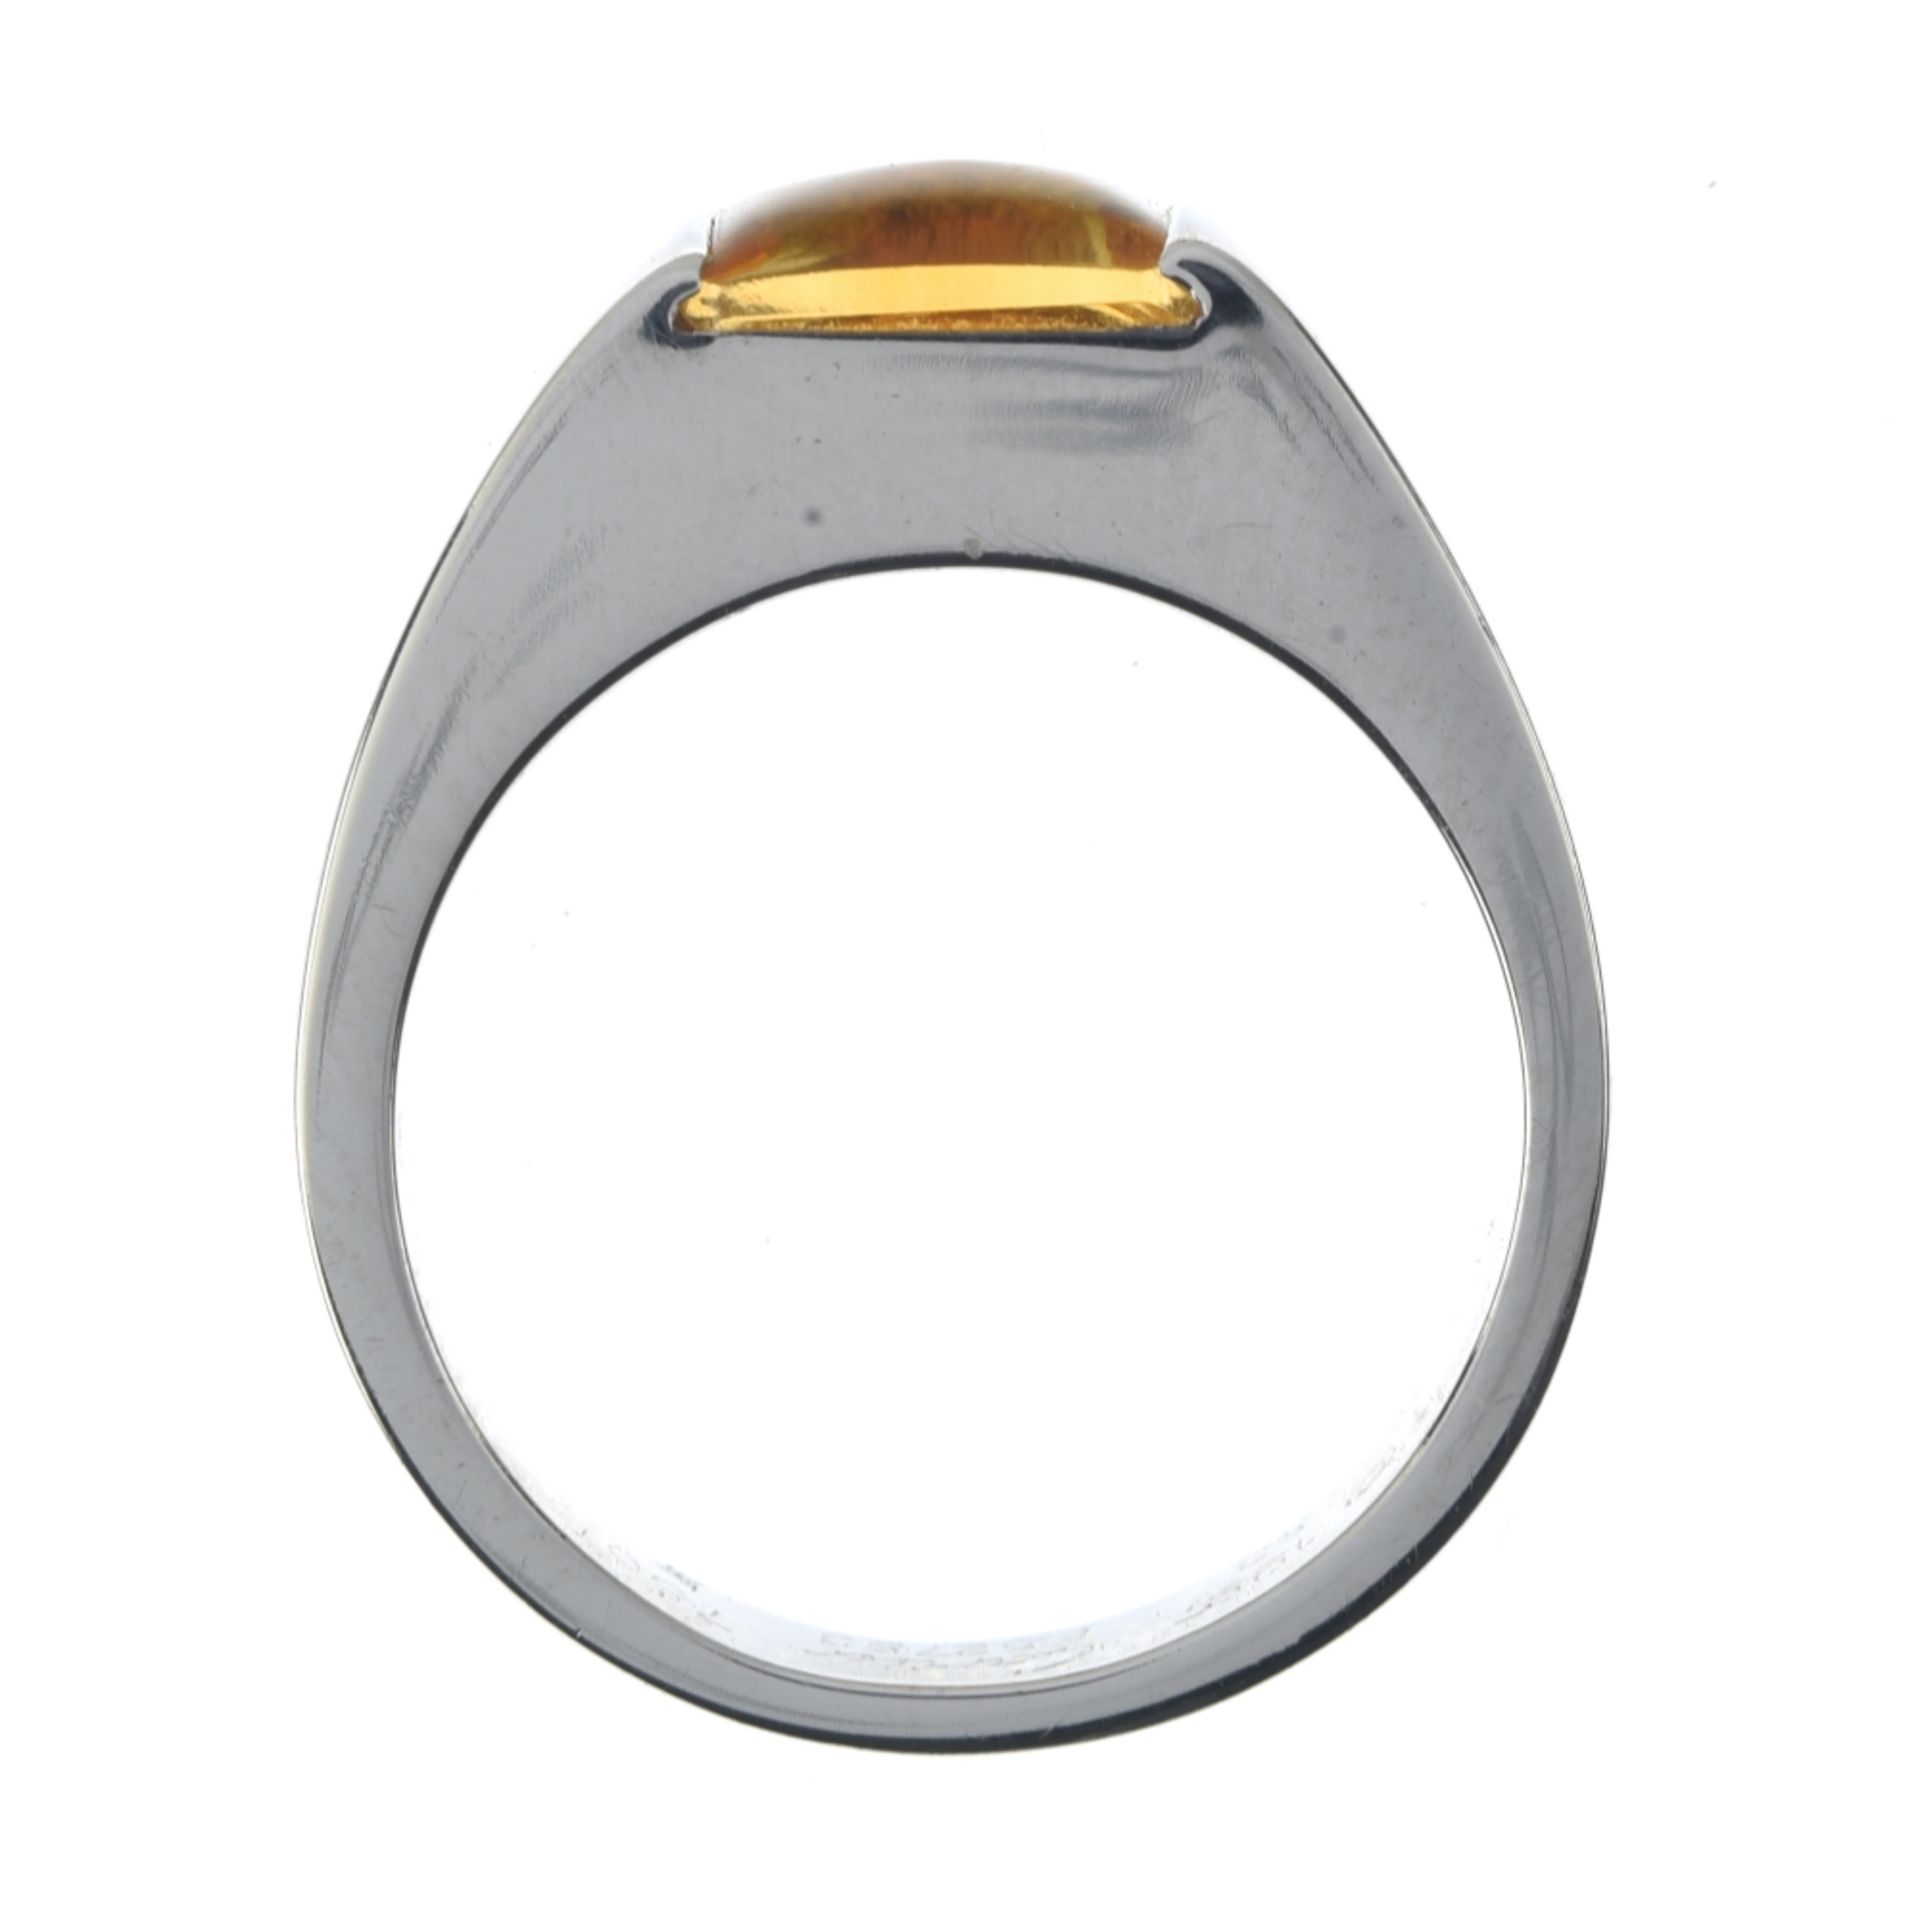 Cartier "Tank" citrine ring 18 kt white gold set with a citrine cabochon. Numbered and signed, - Image 3 of 3